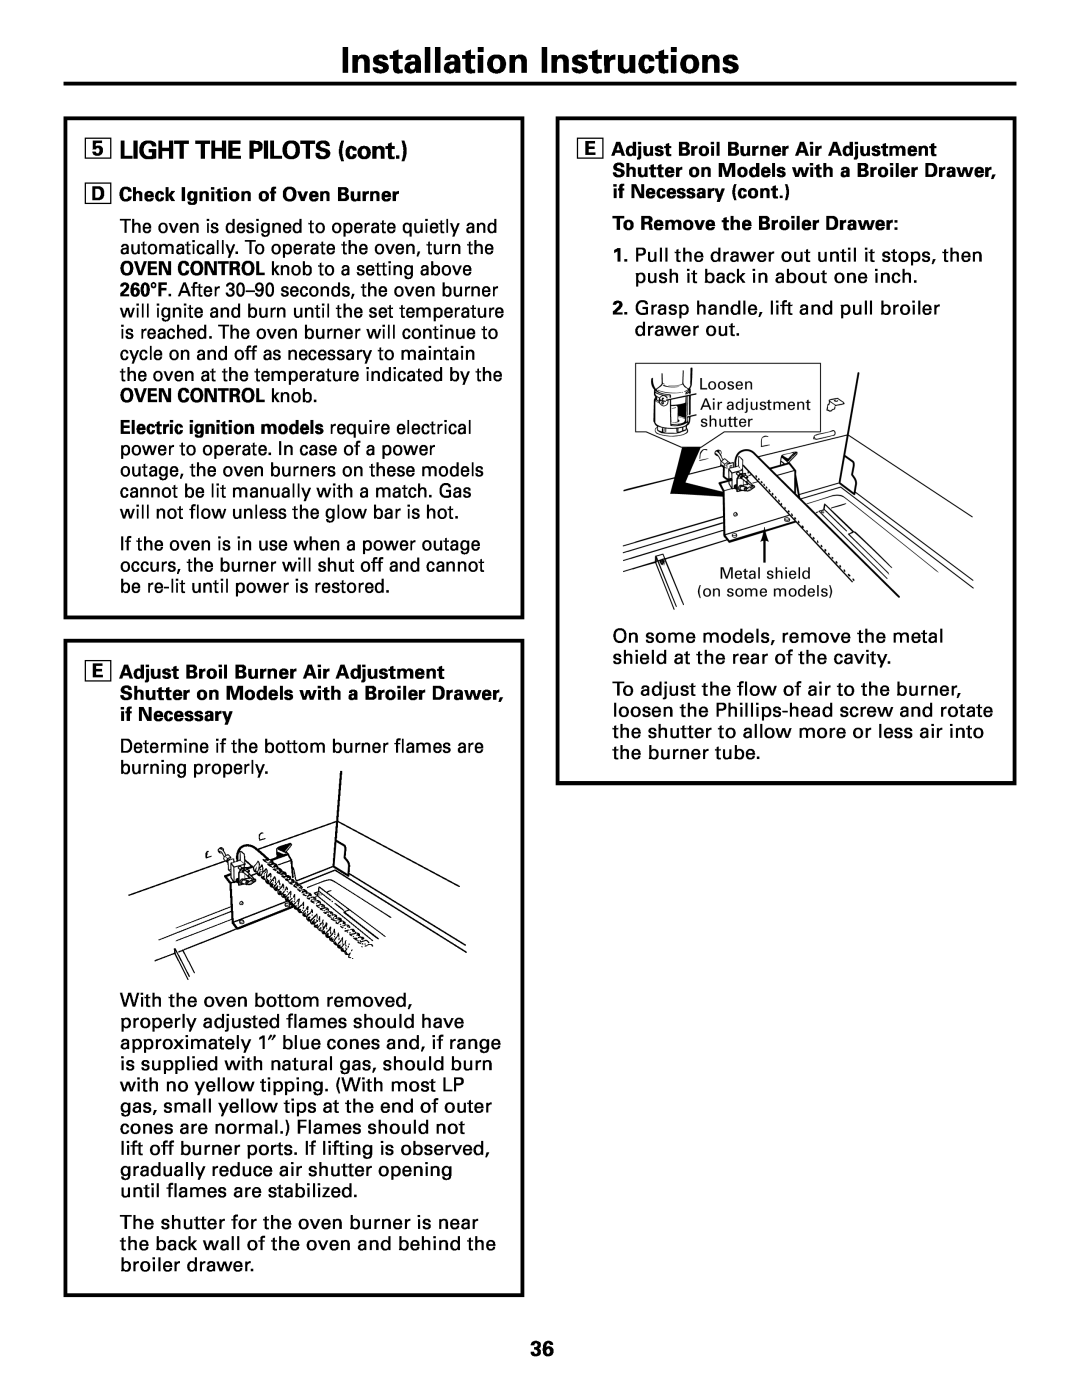 GE JGBC20 Installation Instructions, 5LIGHT THE PILOTS cont, DCheck Ignition of Oven Burner, To Remove the Broiler Drawer 